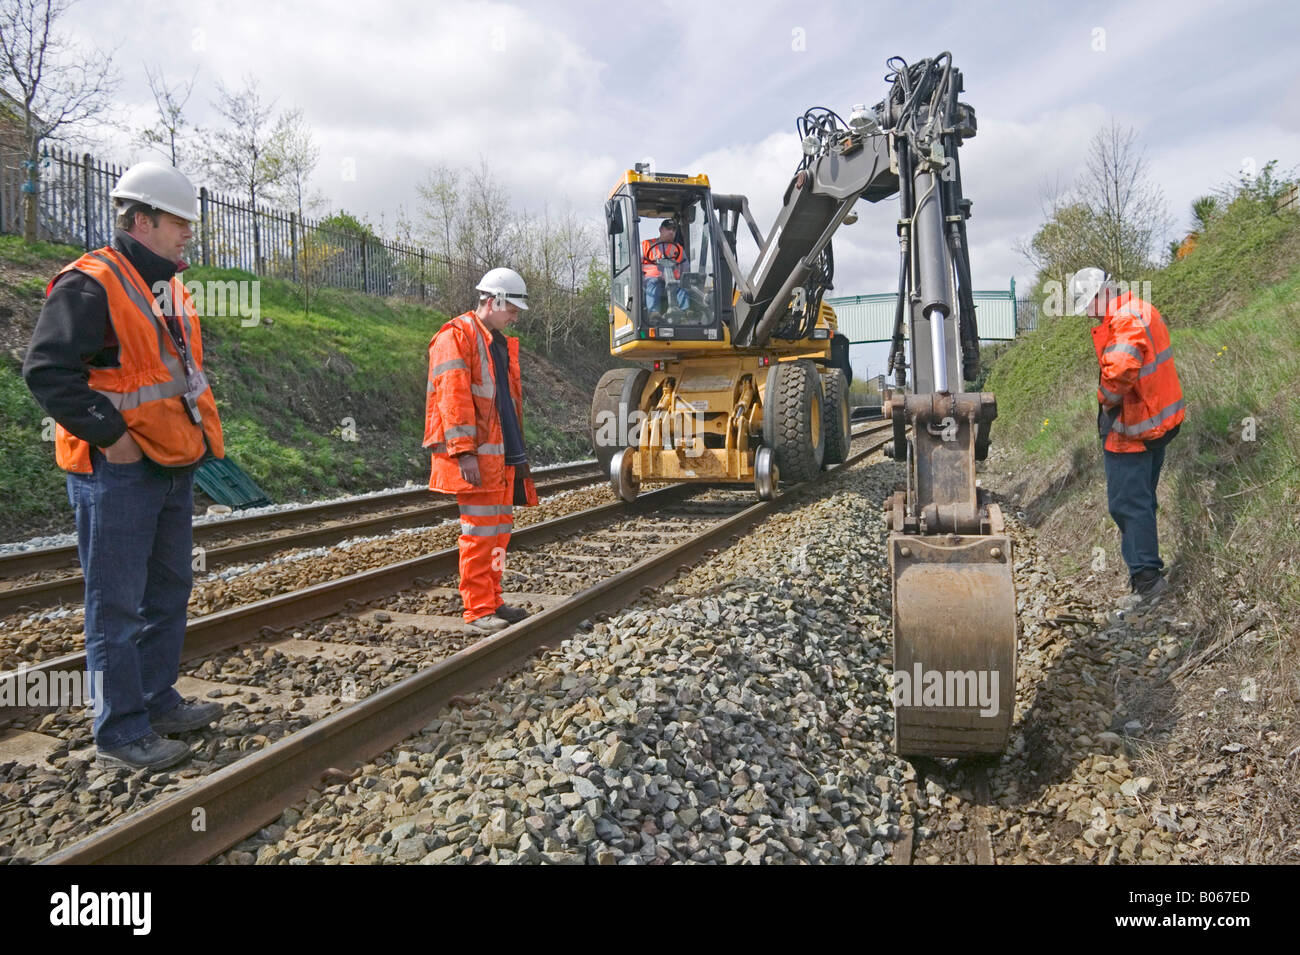 Specialist contractor using road-rail vehicles to excavate and replace outdated track drainage system on a busy rail network. Stock Photo